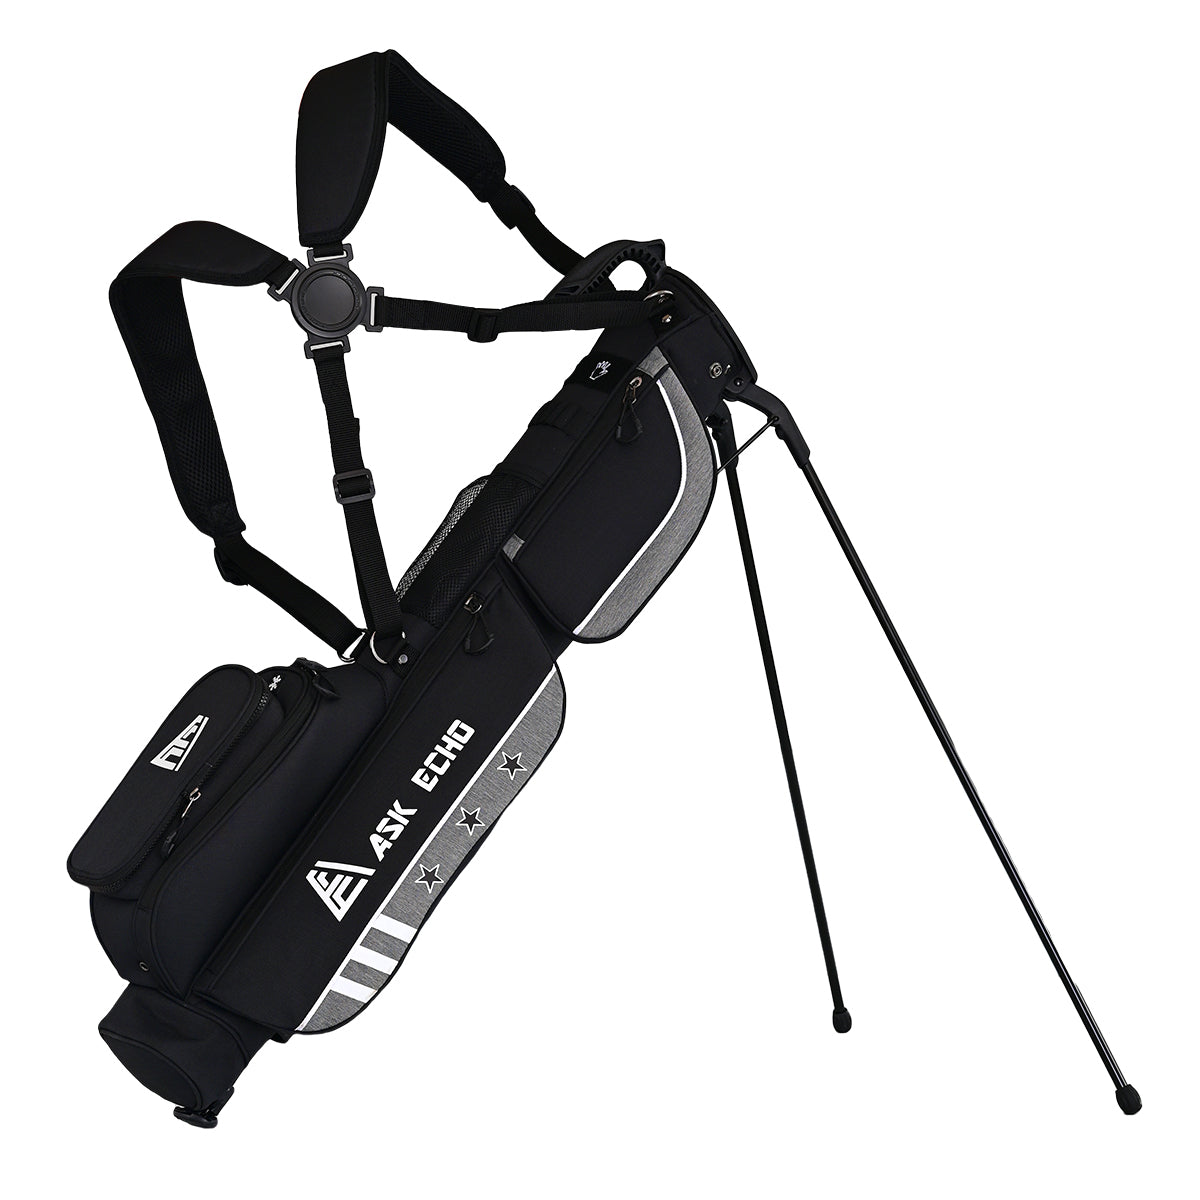 Askecho Golf Sunday Bag Holds Up To 12 Clubs Enjoy Par 3 With Weekend 2.0 / Grey